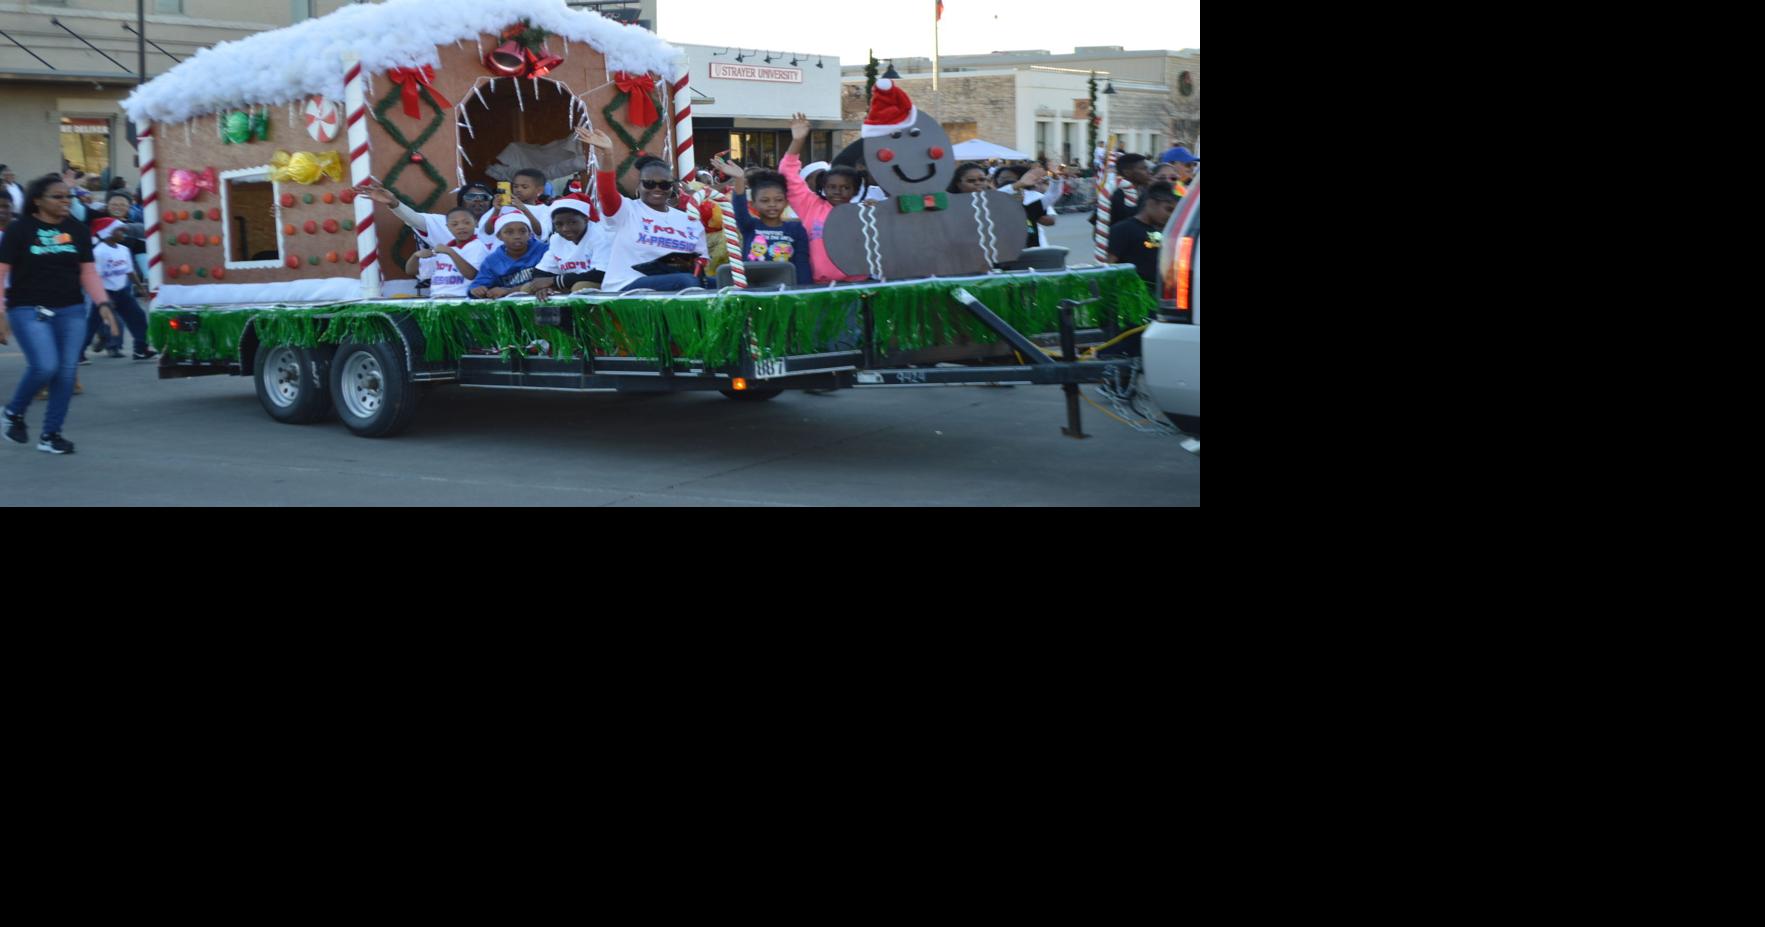 Killeen’s 58th Annual Christmas Parade is Saturday Local News